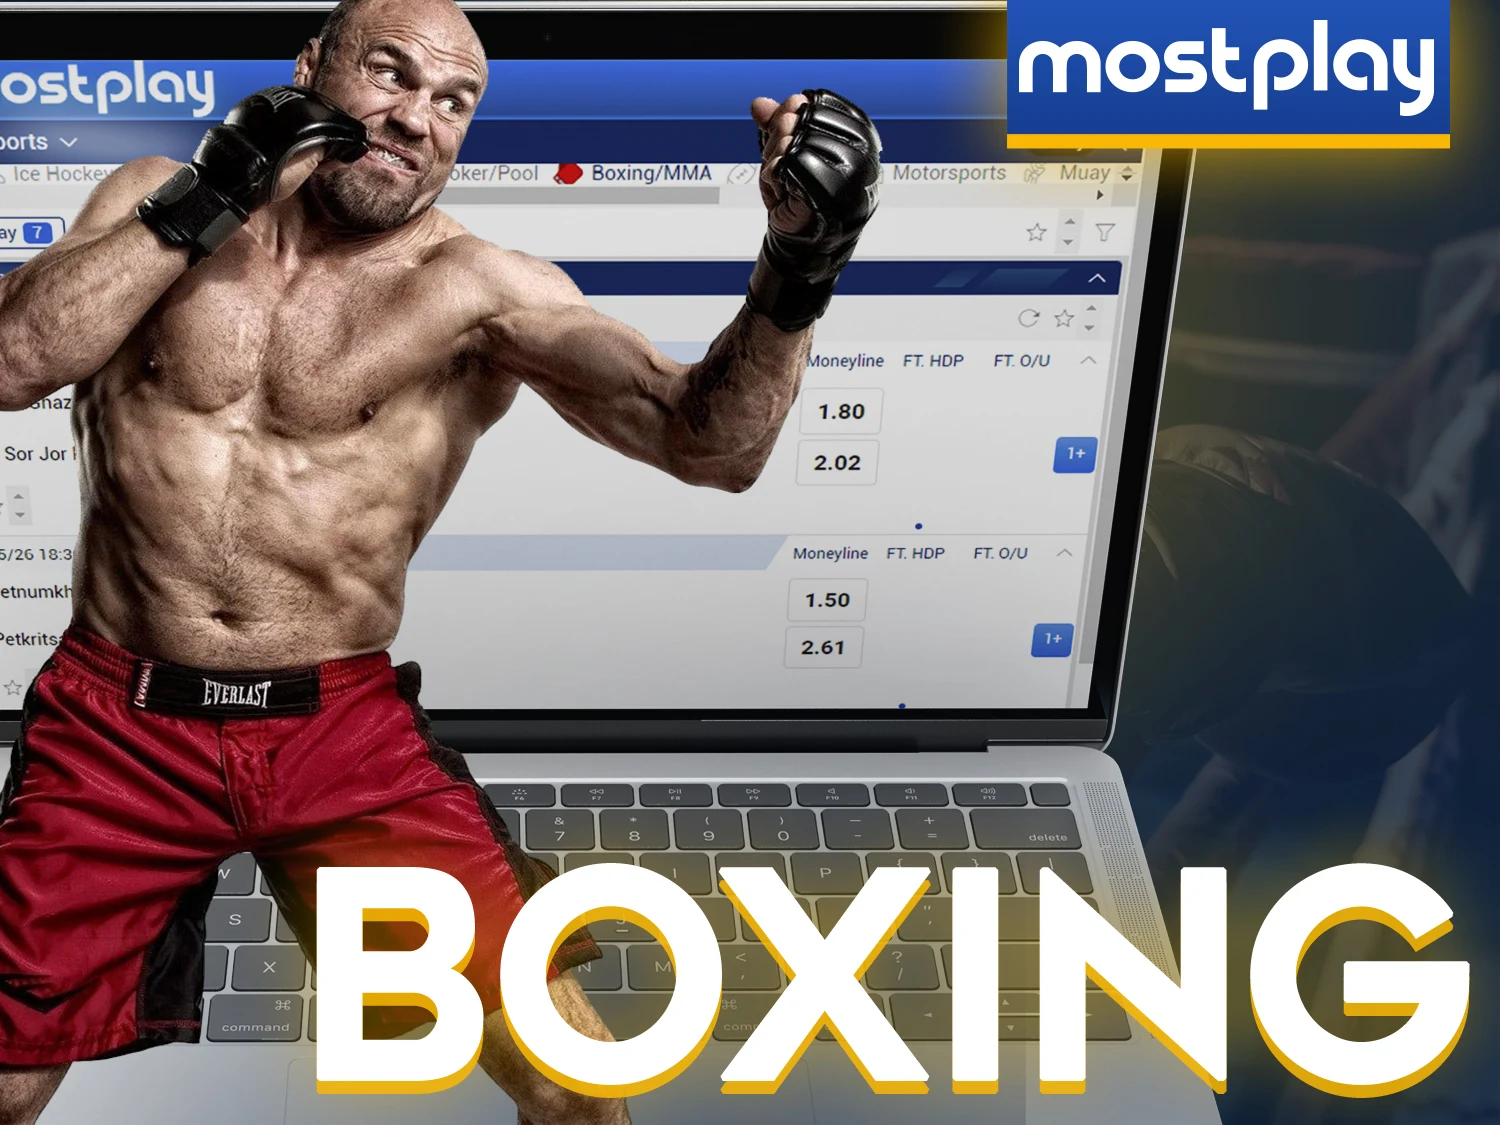 Bet on the most profitable fighters at Mostplay.